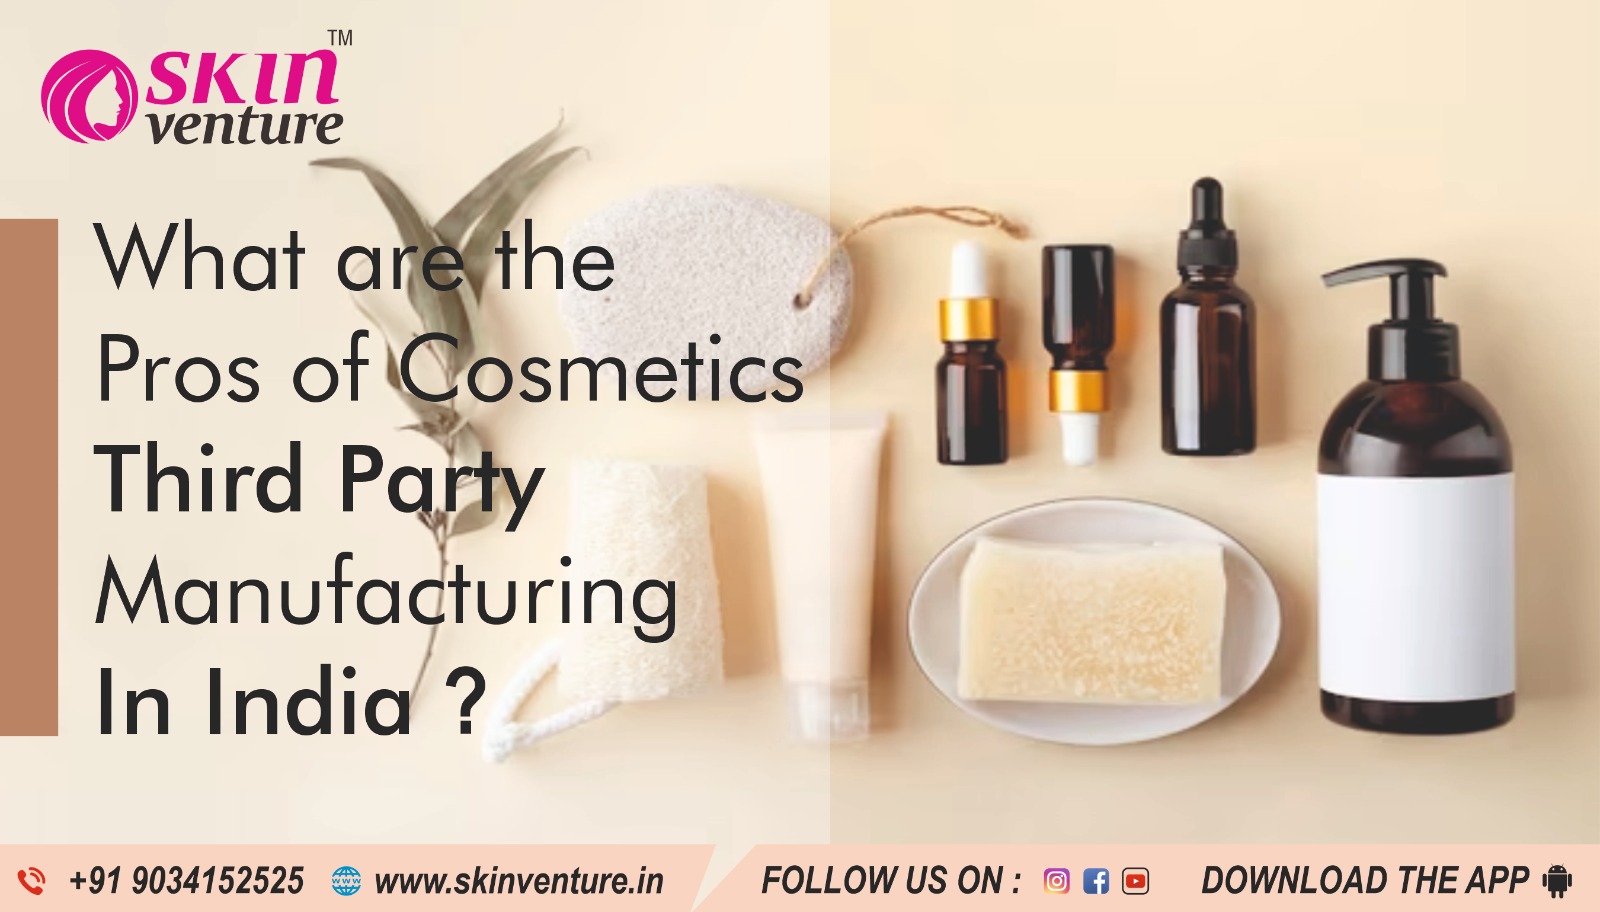 What are the Pros of Cosmetics Third Party Manufacturing in India?